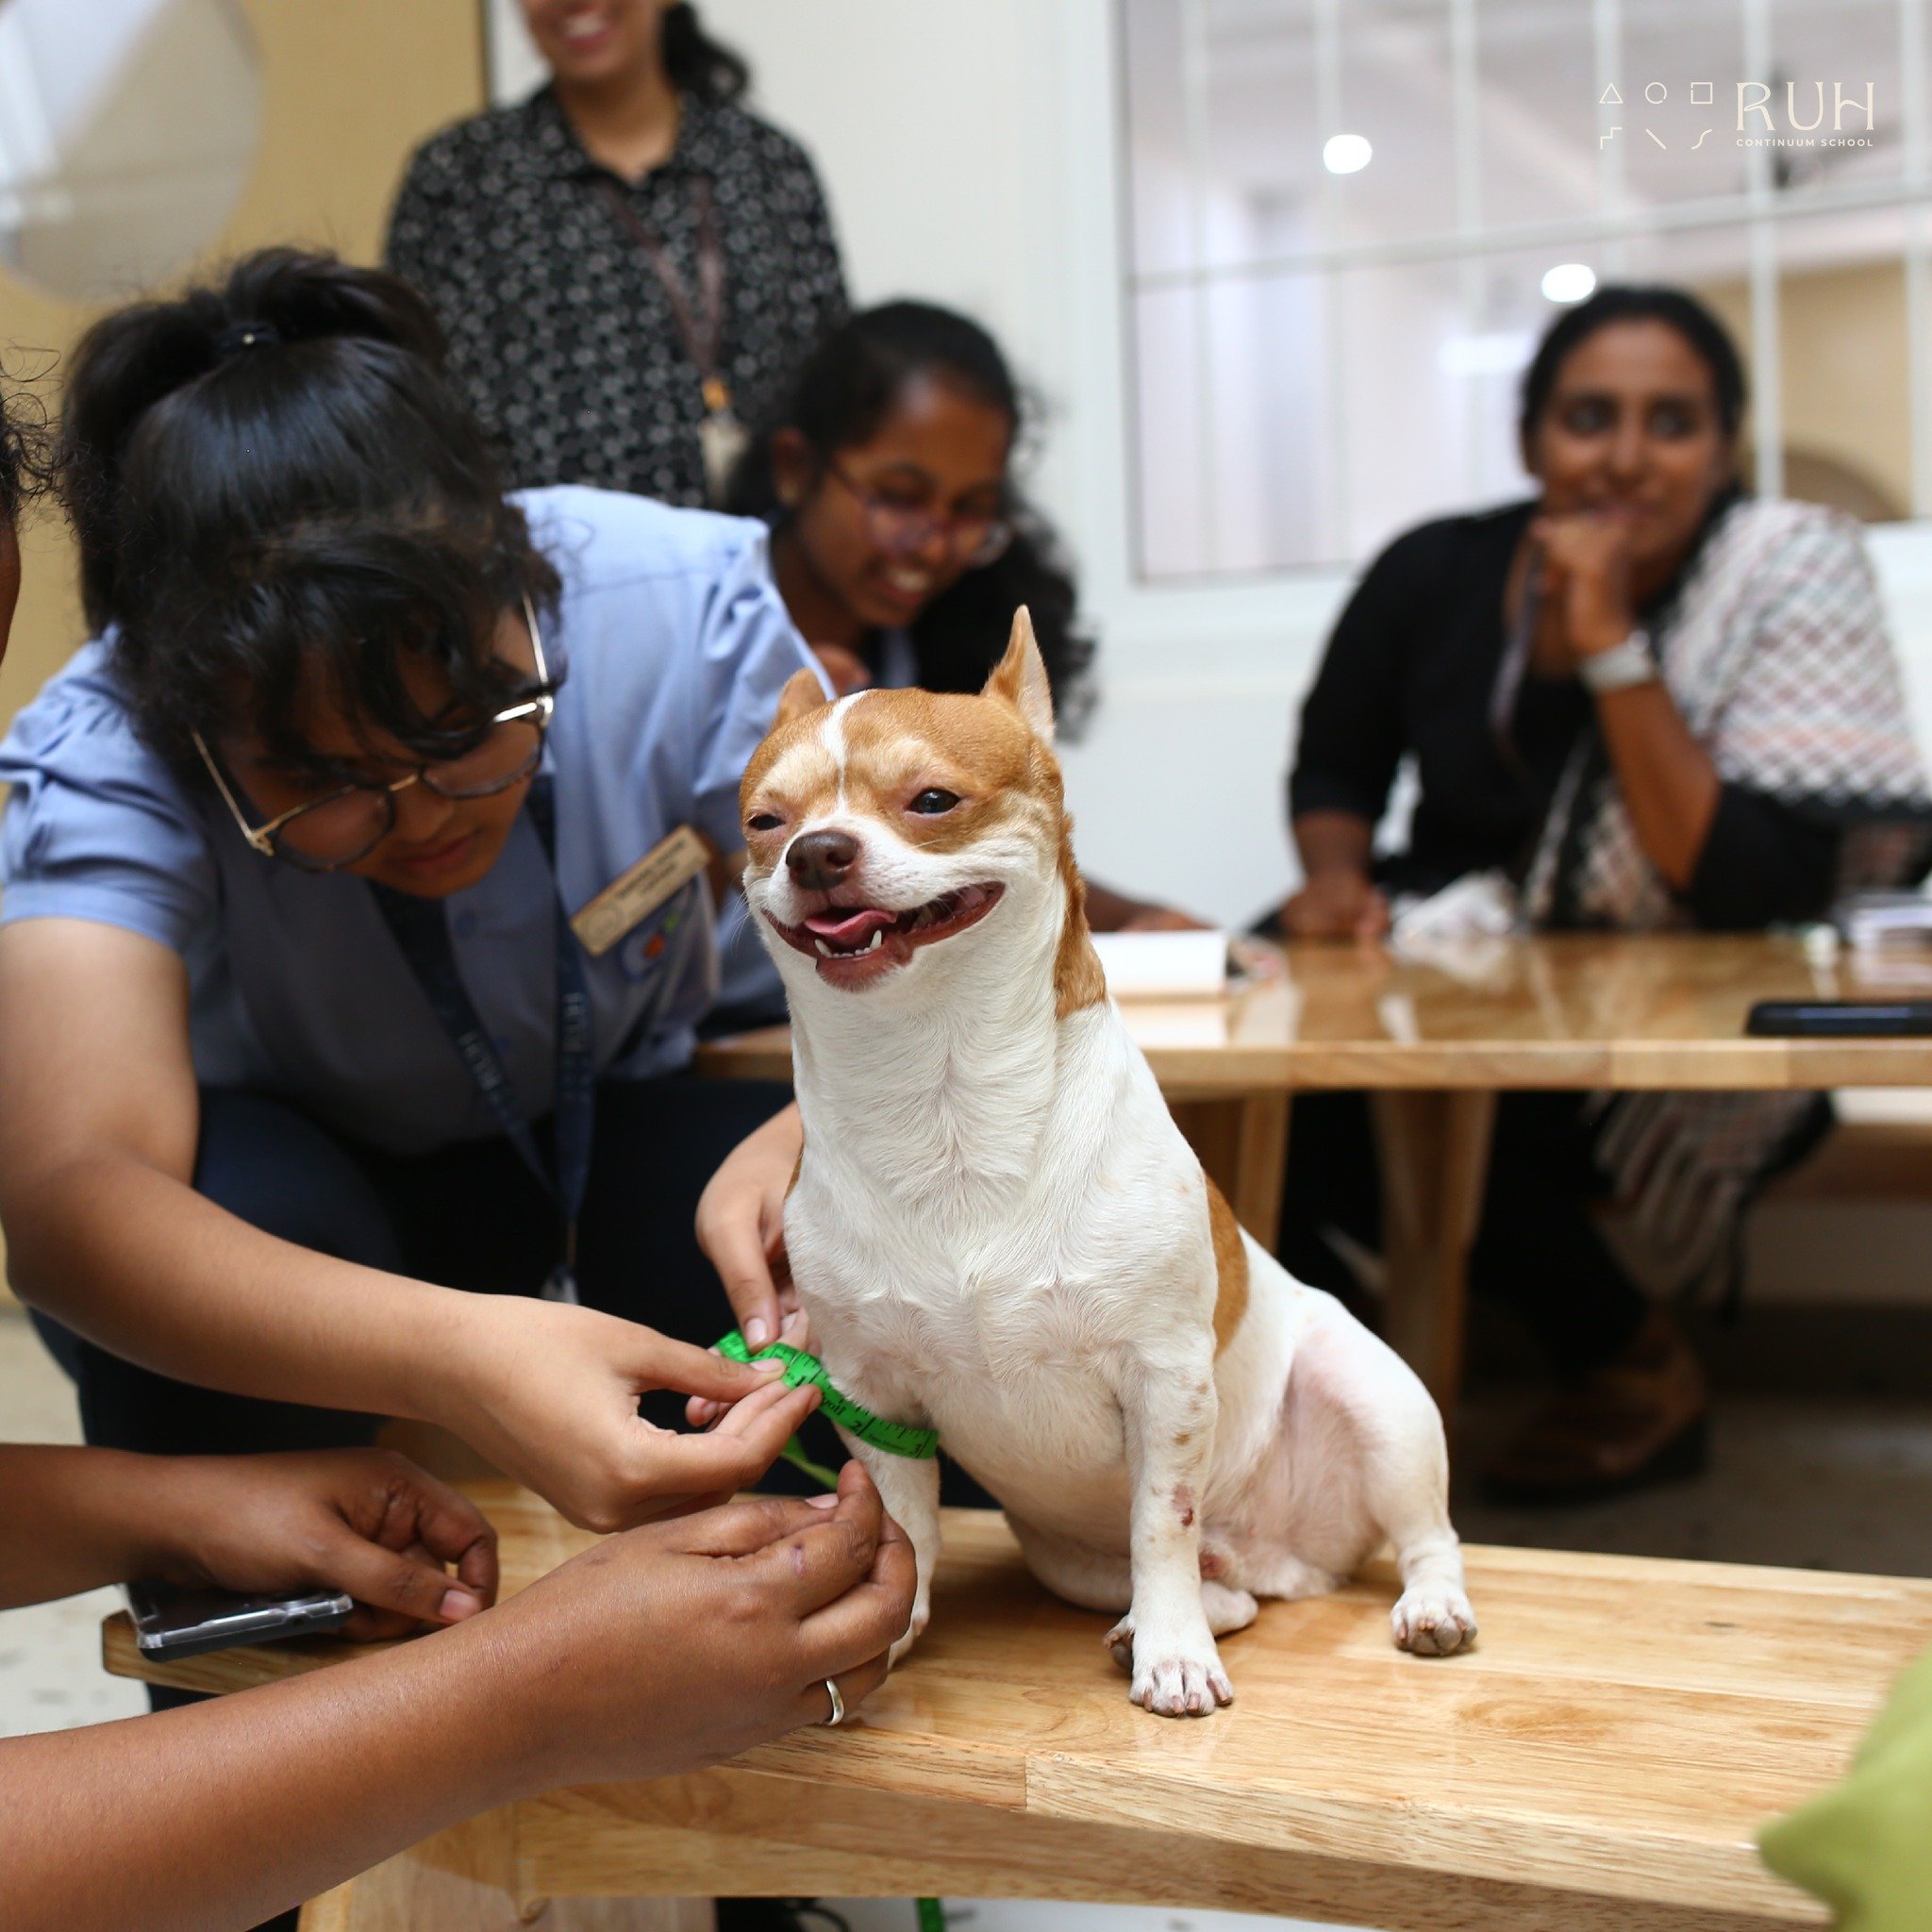 Happy National Pet Day! 🐶

Step into the world of sustainable pet fashion! Our Grade 8 students are leading the charge with their eco-conscious designs for Rocco and Raldo, starting with meticulous measurements for their custom outfits. It's all abo